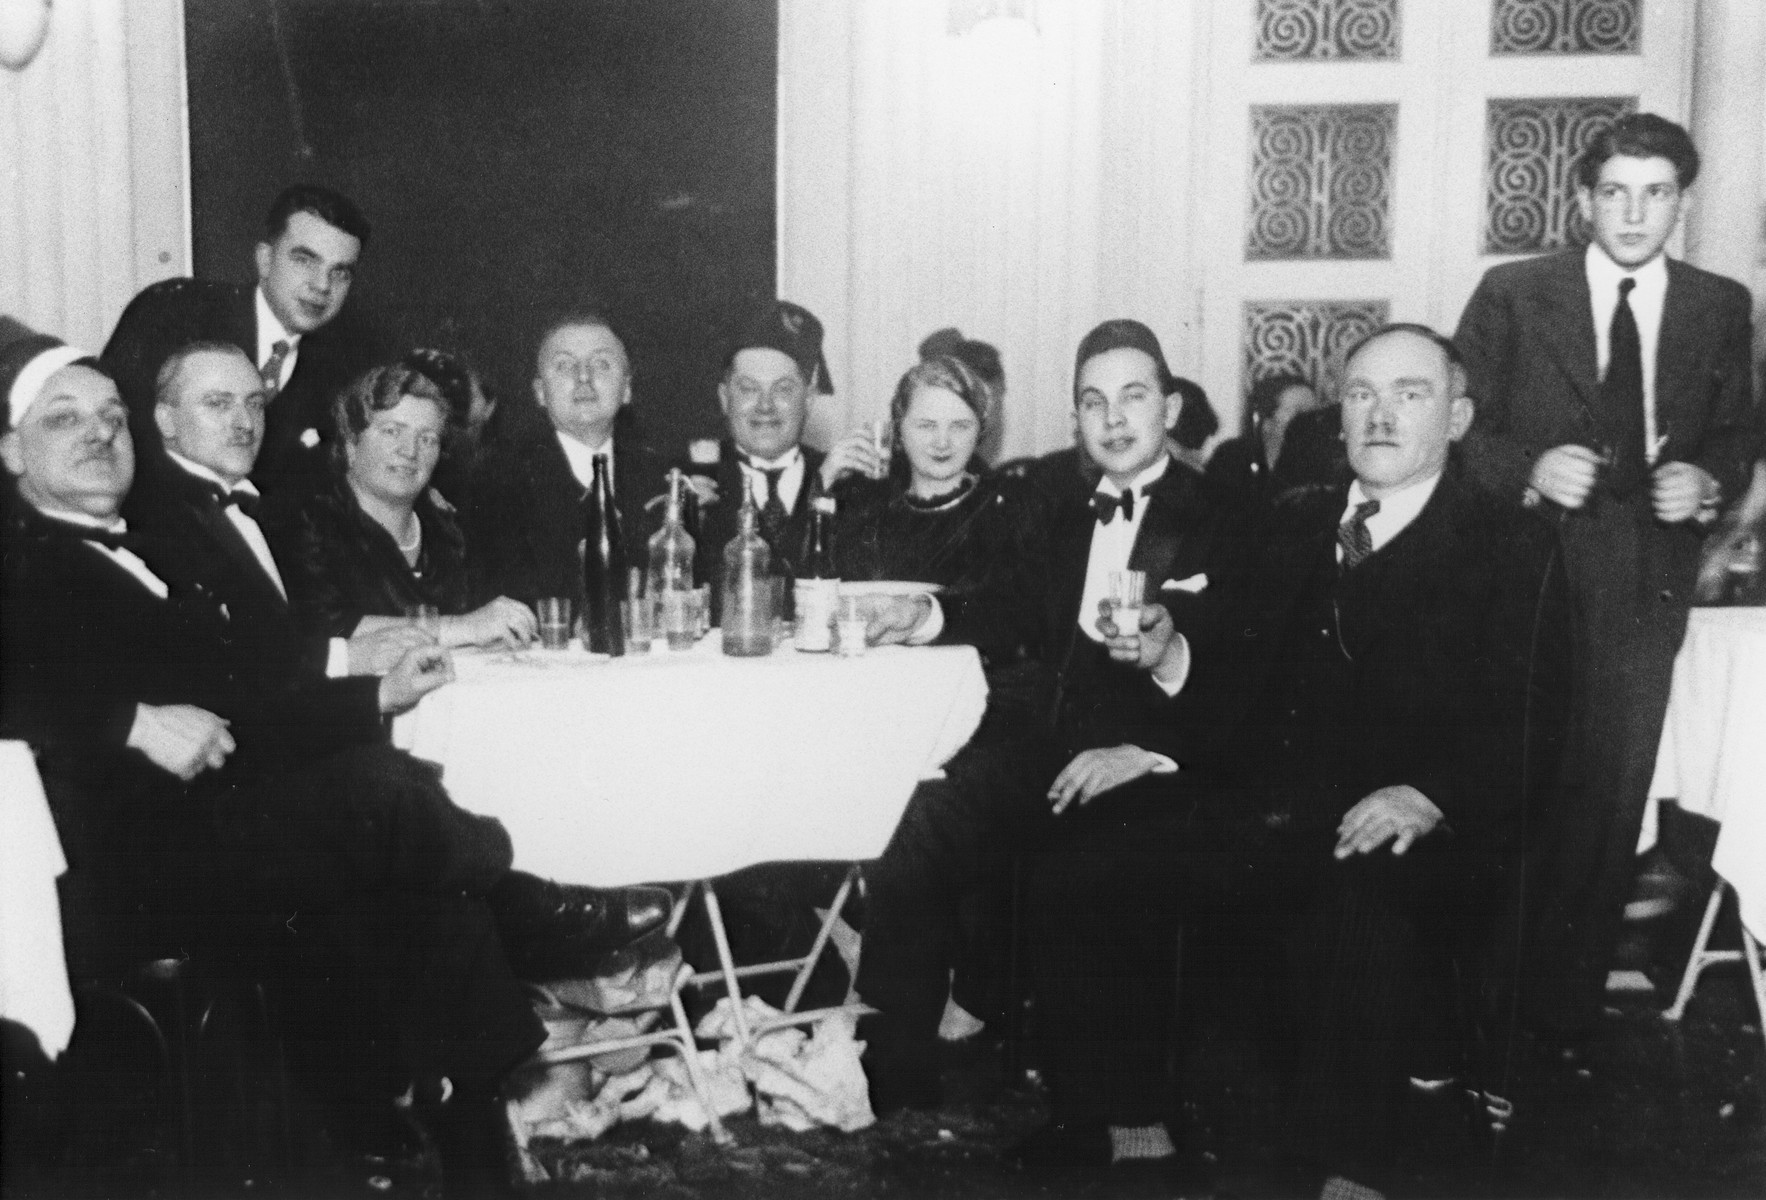 A group of Jewish friends in Zagreb raise their glasses at a social gathering to celebrate the holiday of Purim.

Among those pictured is Josef Deutsch(center wearing a Turkish hat).